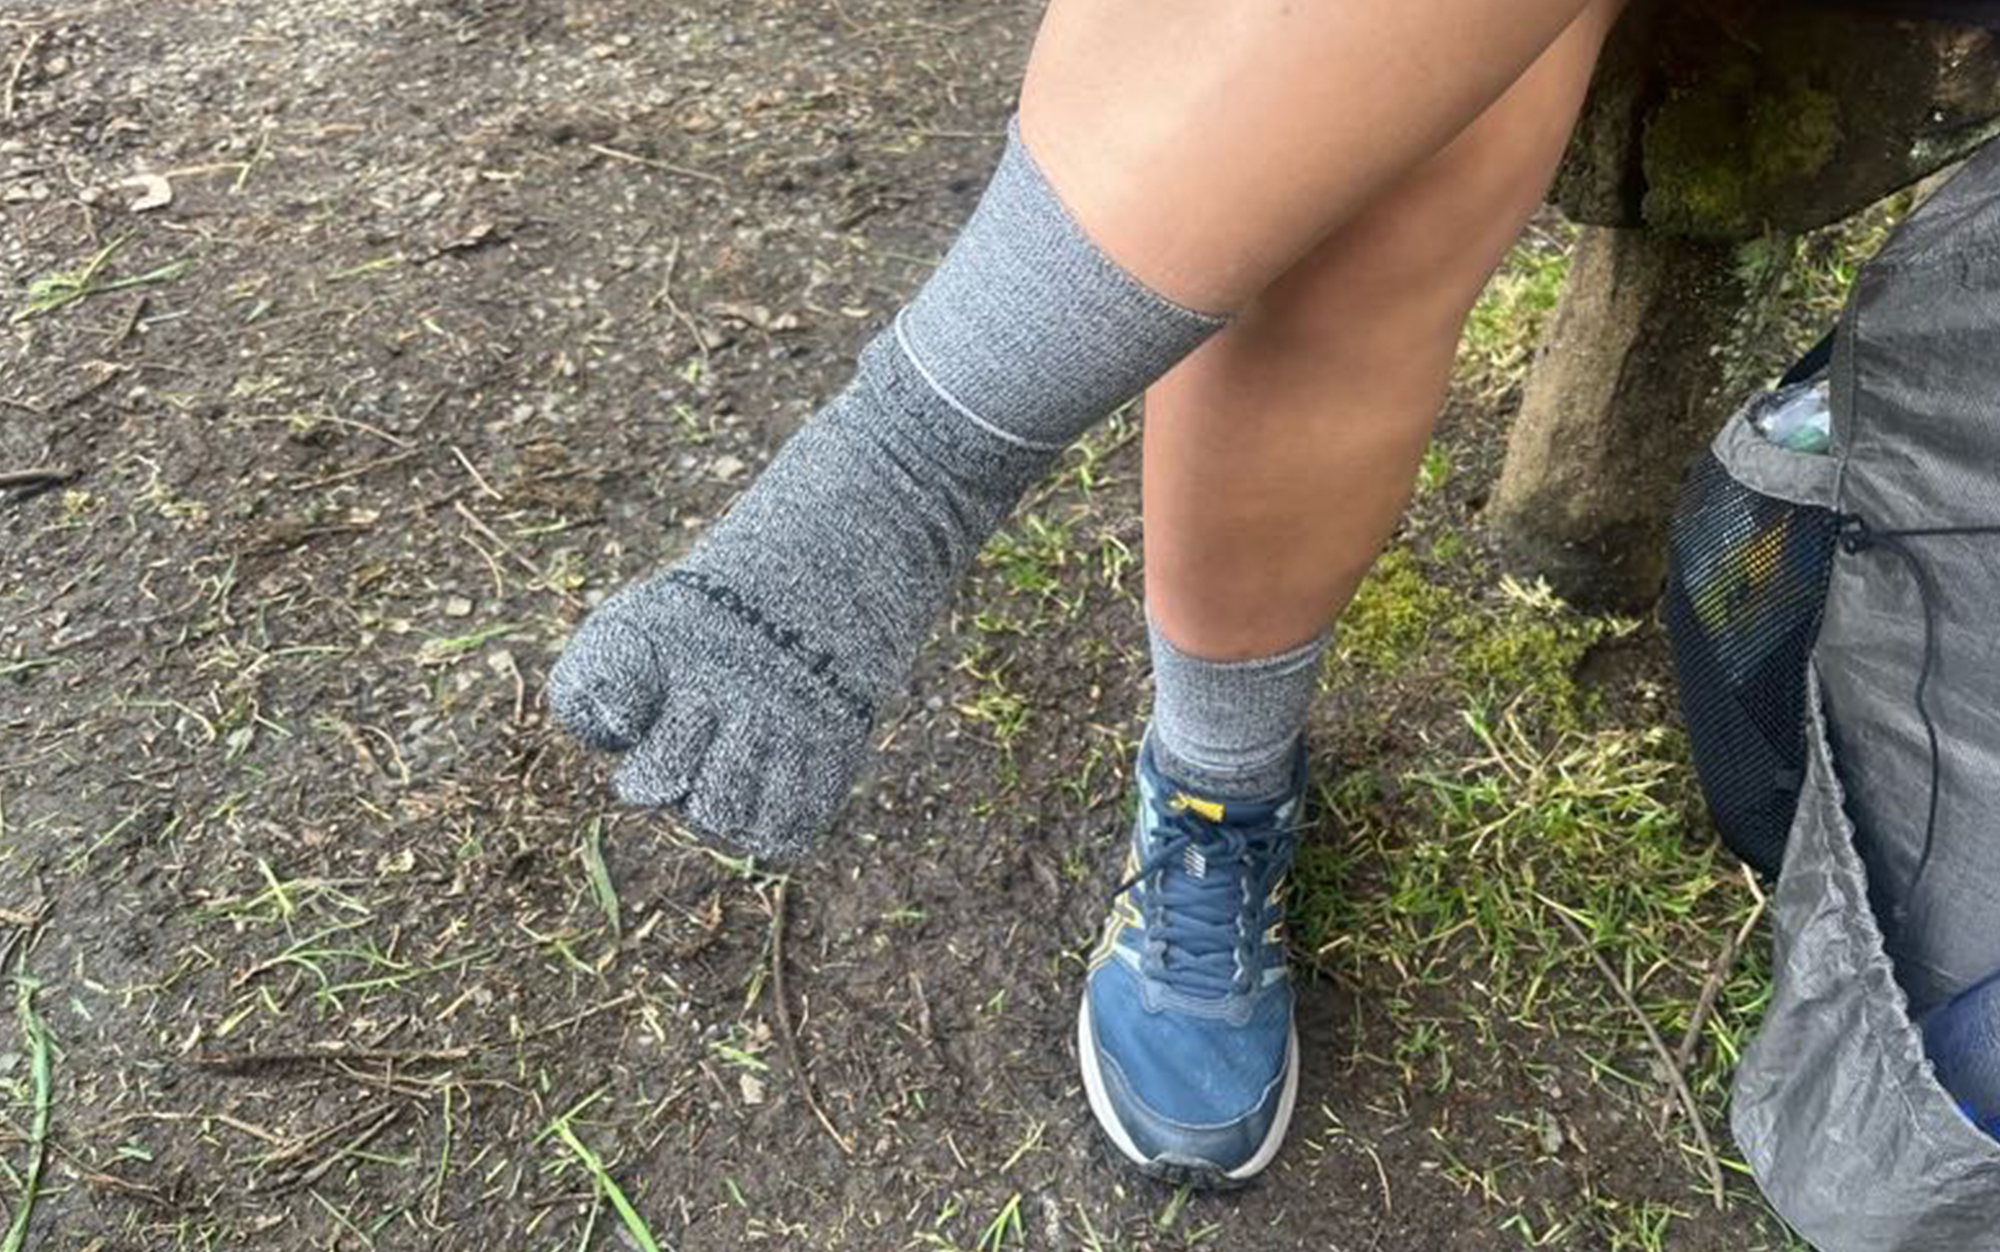 The toe pouches of the Montbell socks helped prevent blisters on our testersâ feet.